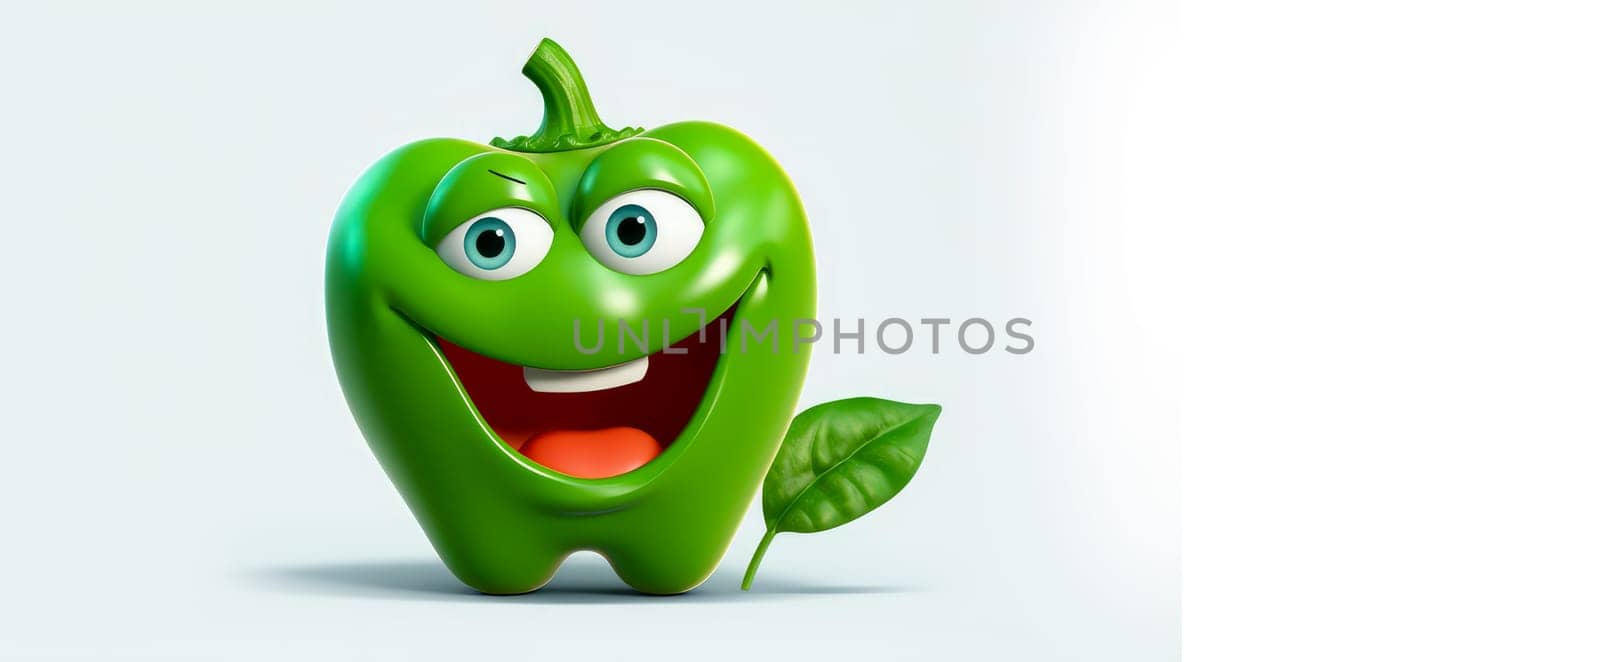 Green pepper with a cheerful face 3D on a white background. Cartoon characters, three-dimensional character, healthy lifestyle, proper nutrition, diet, fresh vegetables and fruits, vegetarianism, veganism, food, breakfast, fun, laughter, banner